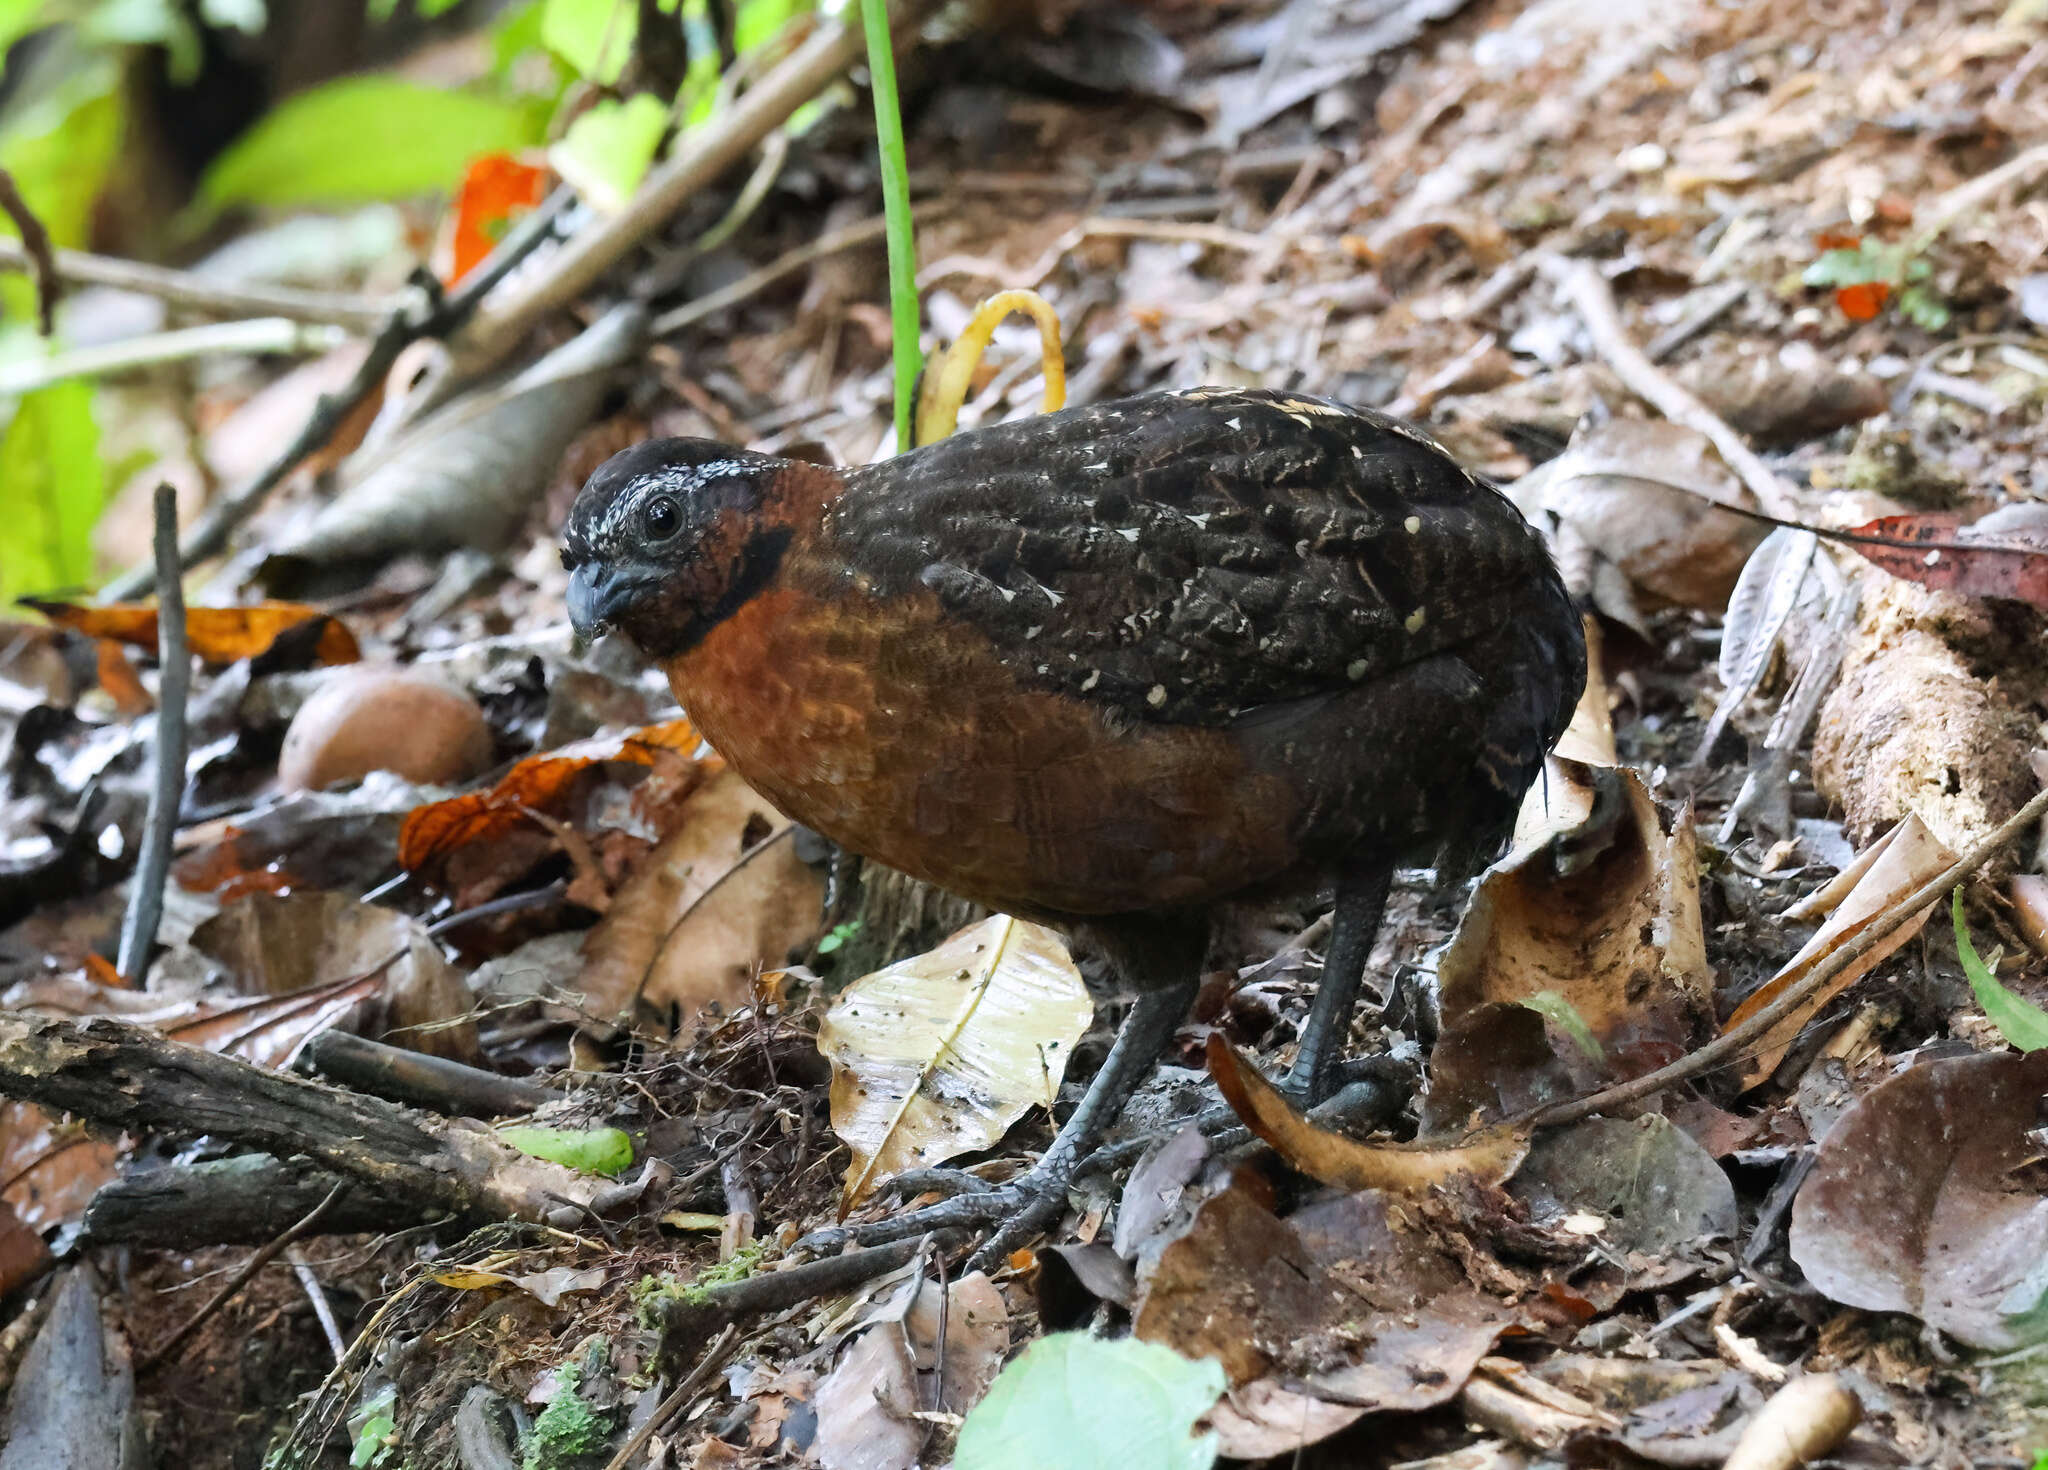 Image of Rufous-breasted Wood Quail